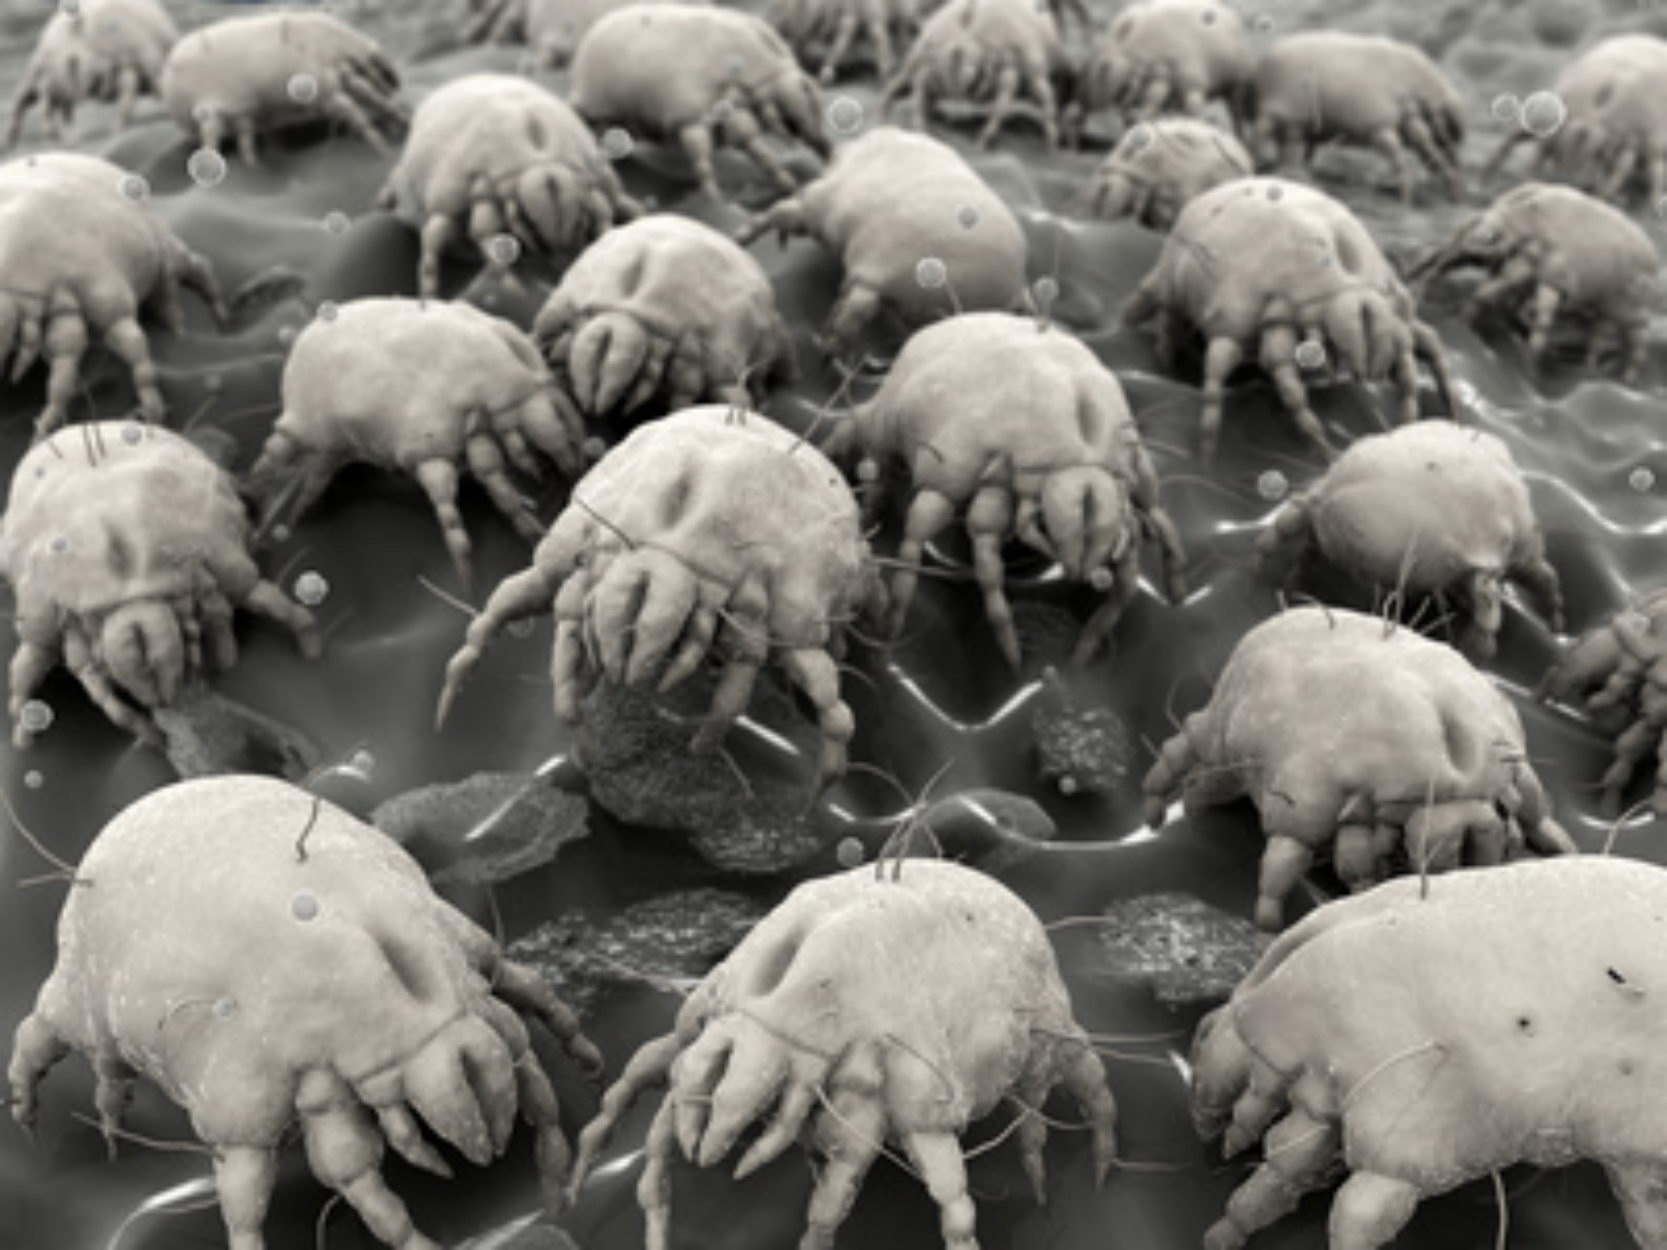 There are over 30,000 species of mites. Look around you, there's probably at least a few million of them in your house.